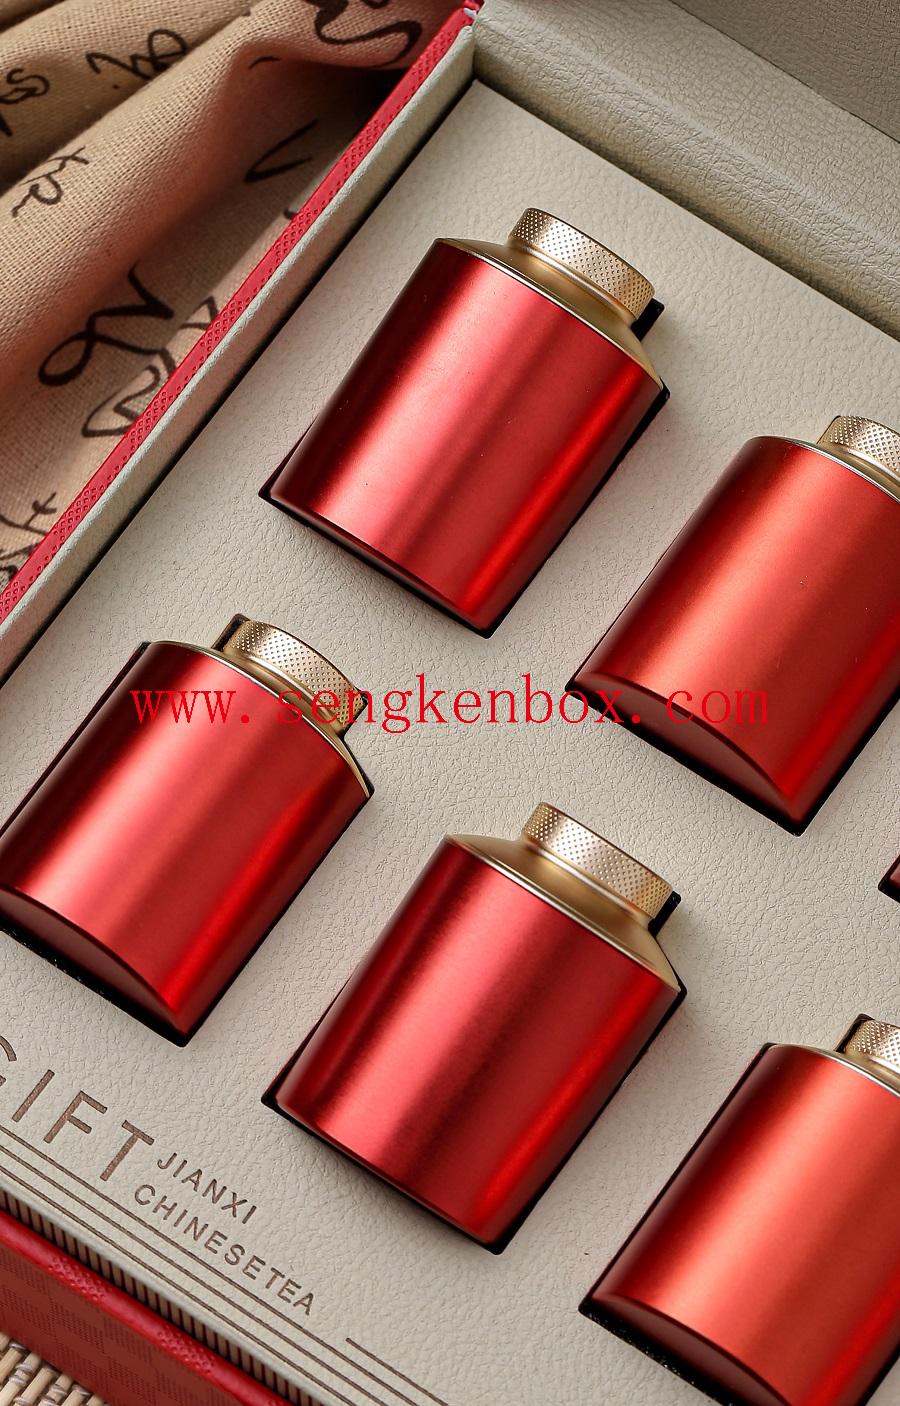 tea box packaging with tea coffee sugar canisters